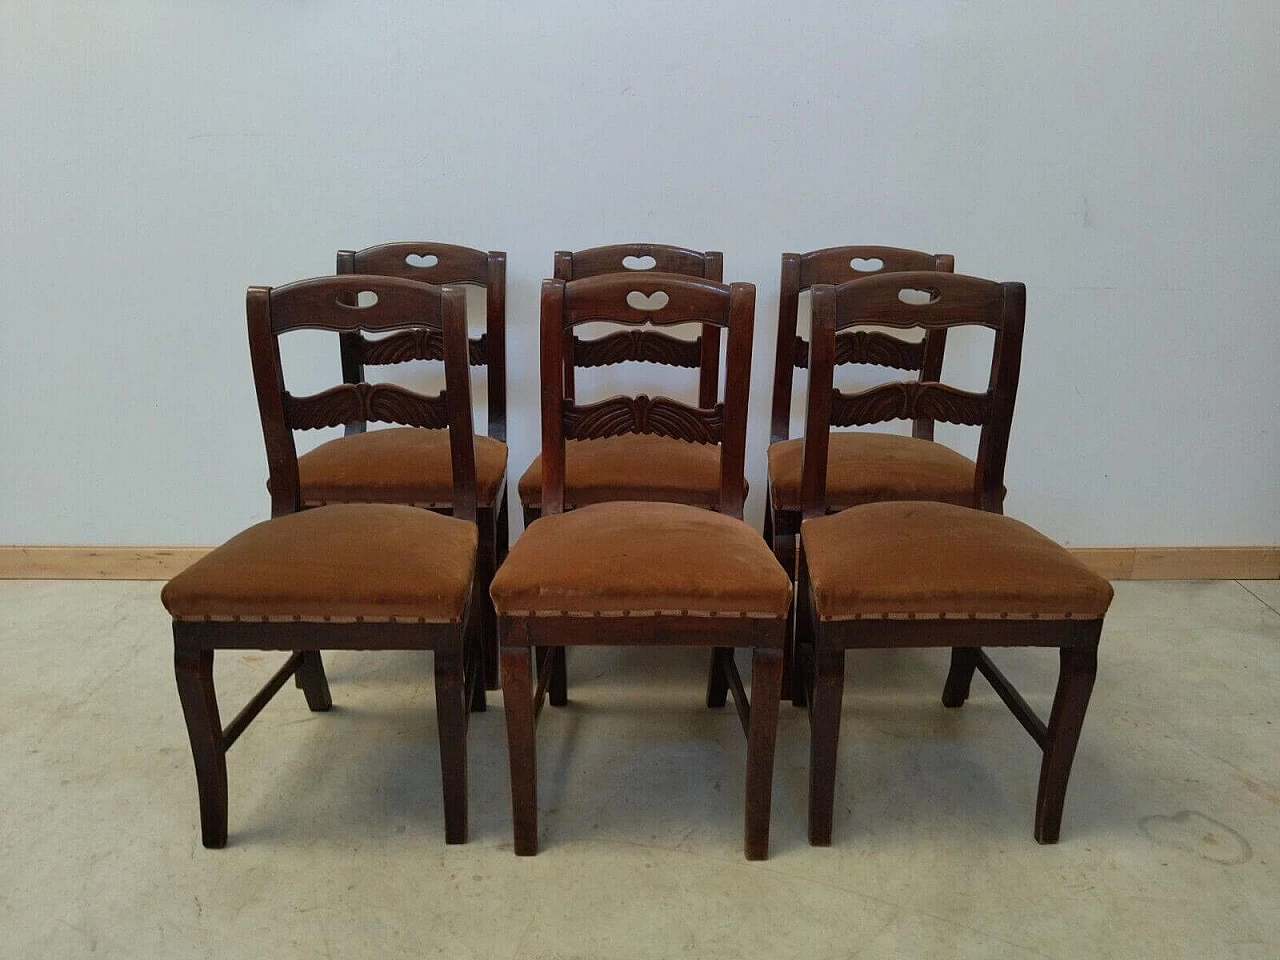 6 Empire-style walnut chairs, early 19th century 12